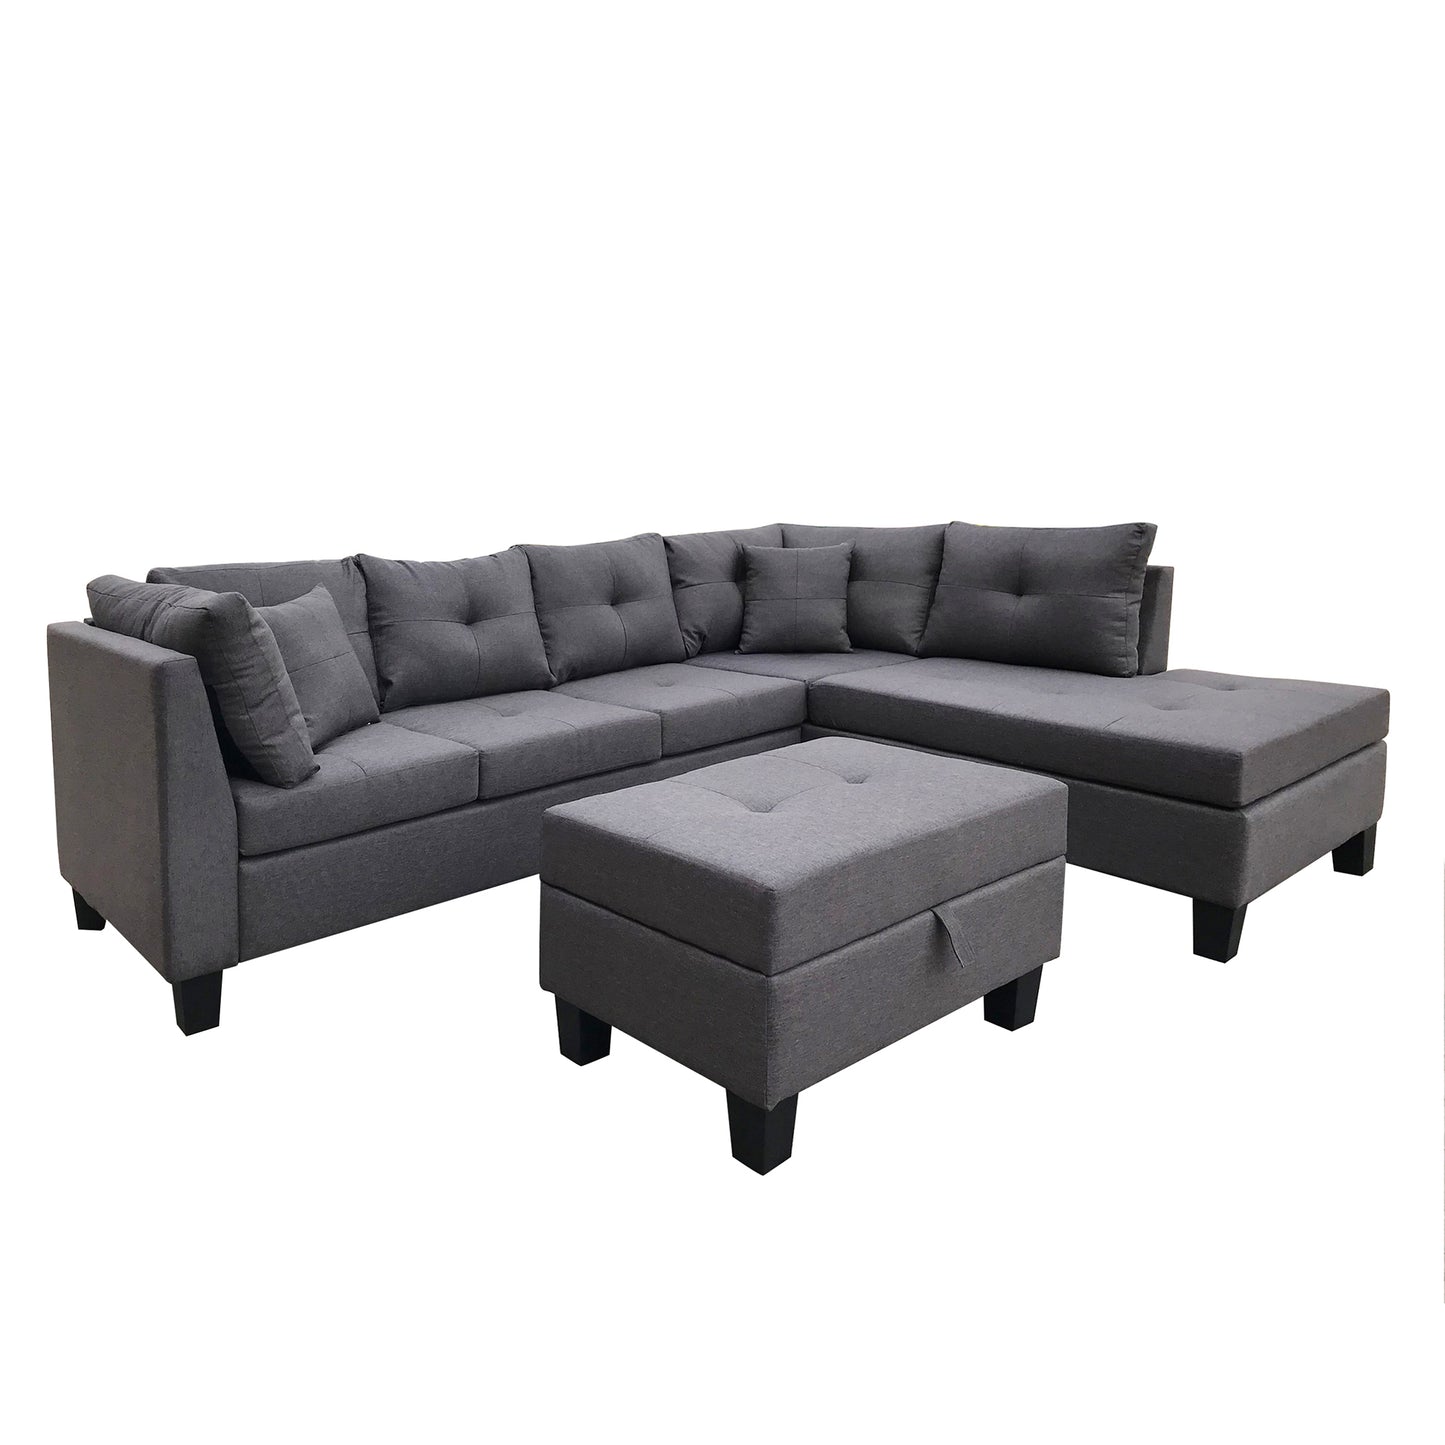 Sectional Sofa Set     with  Right Hand Chaise Lounge and  Ottoman  (Dark Grey)